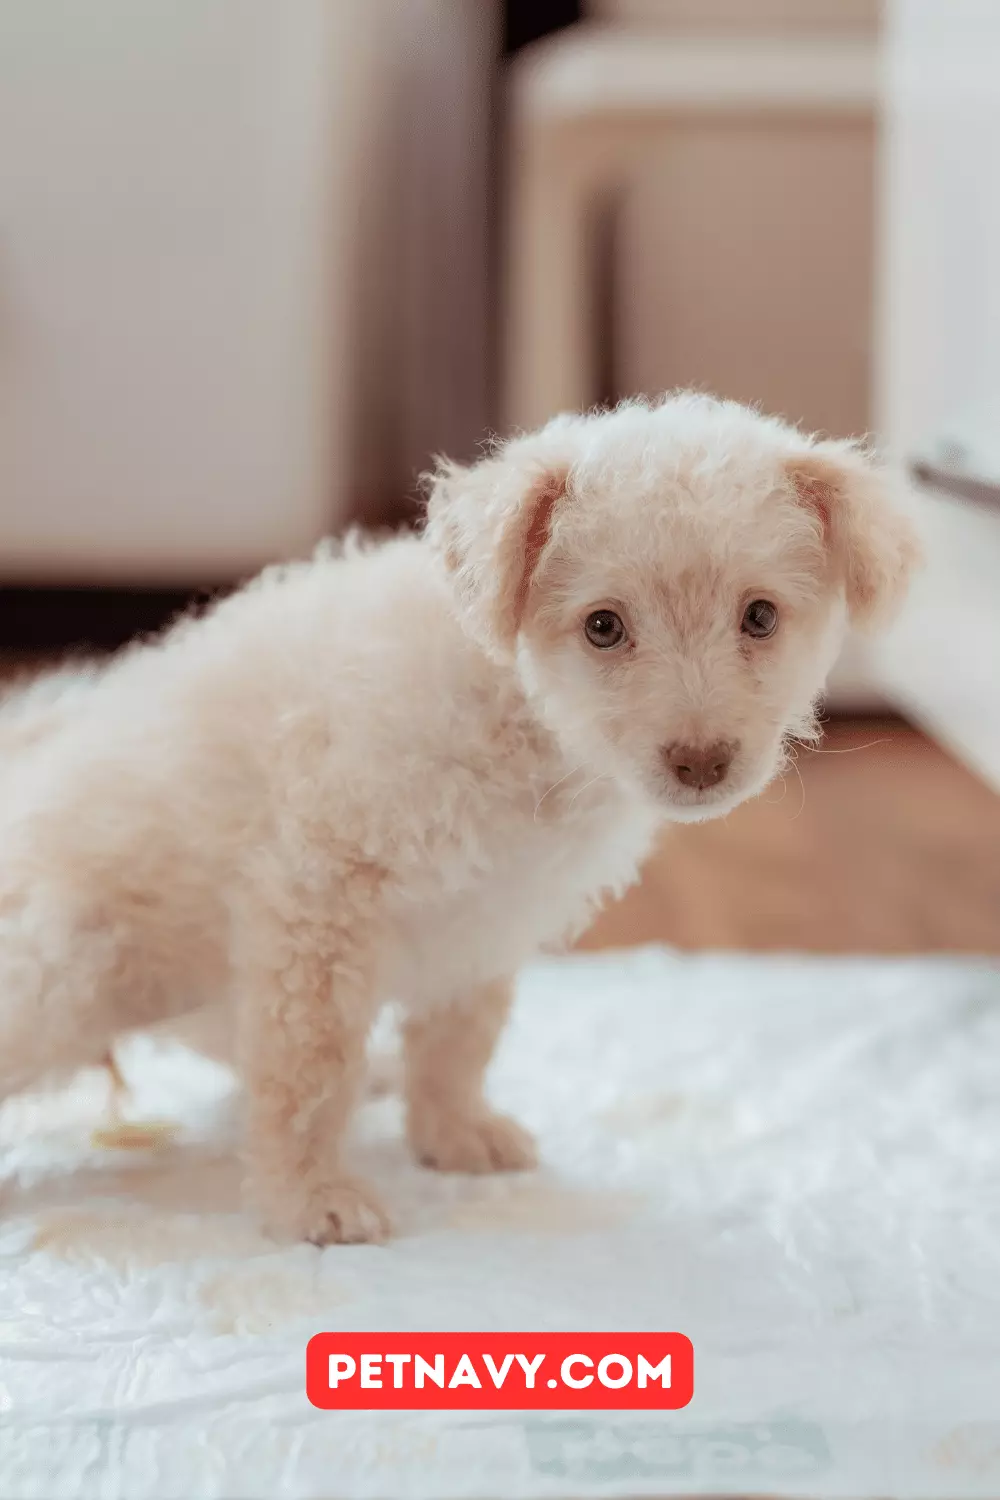 Is It Dangerous for Dogs to Eat Puppy Pad?